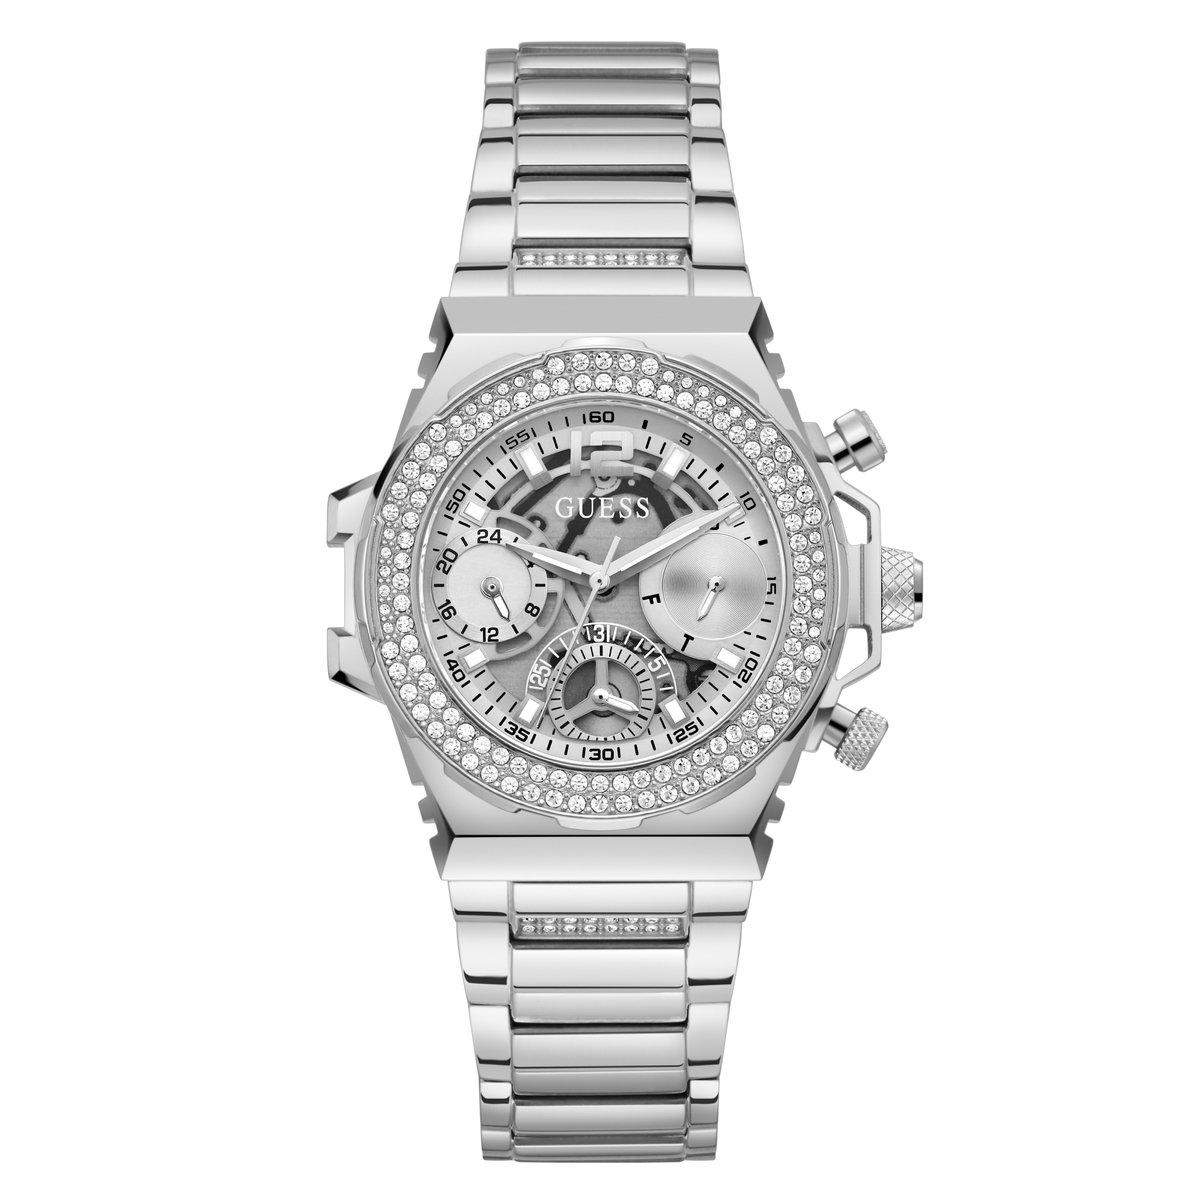 Guess Watches FUSION GW0552L1